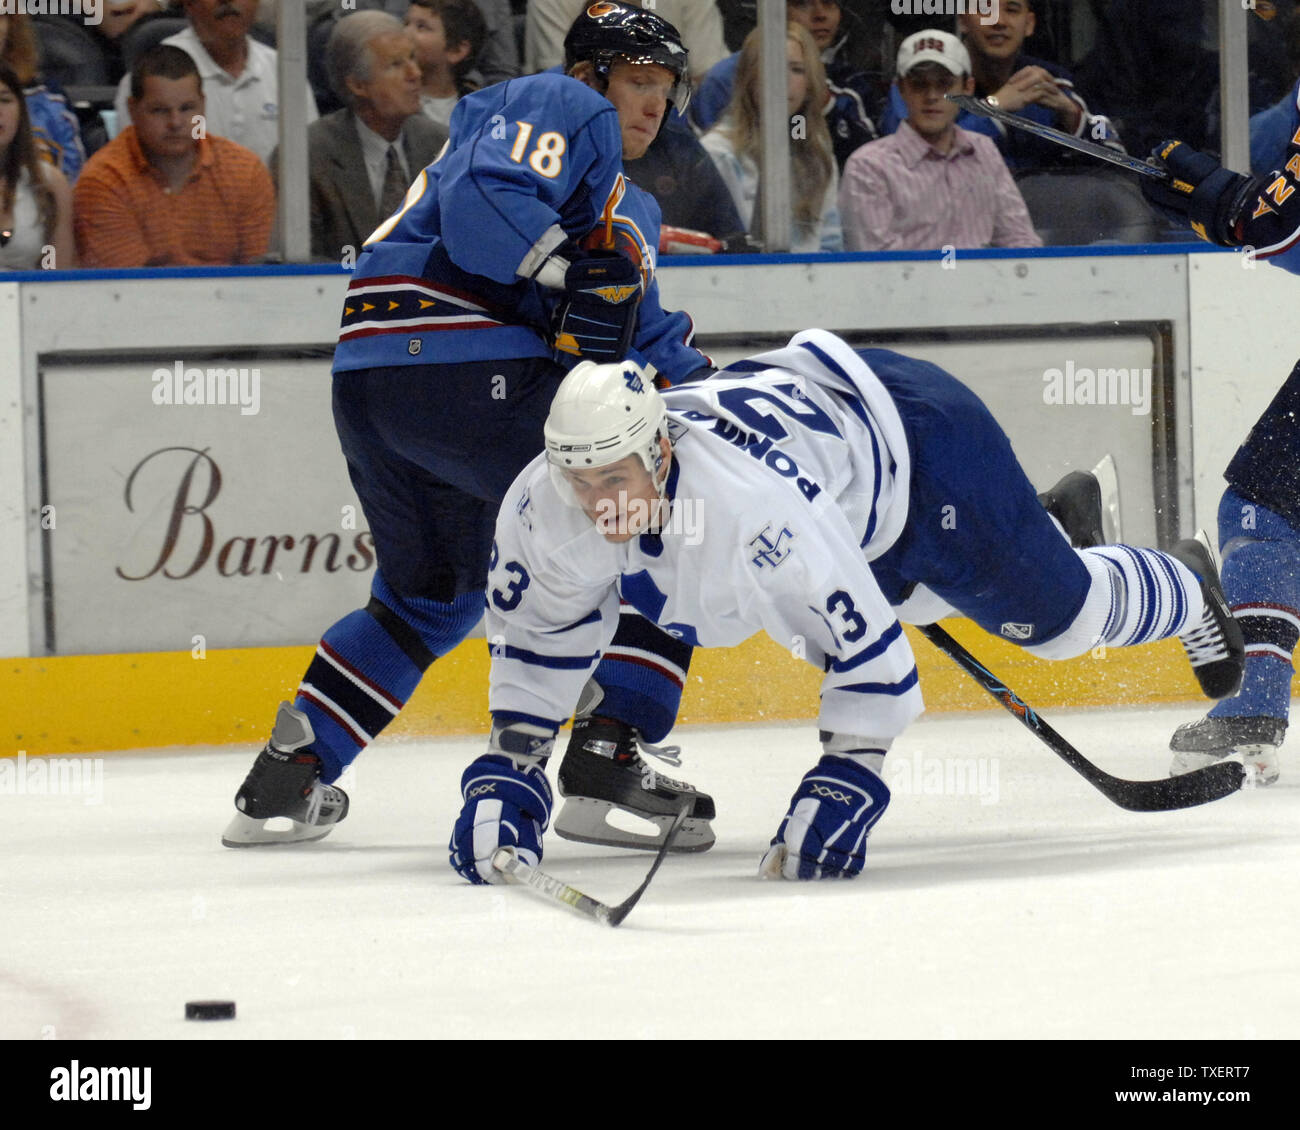 Toronto Maple Leafs Alexei Ponikarovsky (23) of Ukraine crashes to the ice over the stick of Atlanta Thrashers Marian Hossa (18) of Slovakia in pursuit of the puck in the first period at Philips Arena in Atlanta on March 29, 2007.  (UPI Photo/John Dickerson) Stock Photo